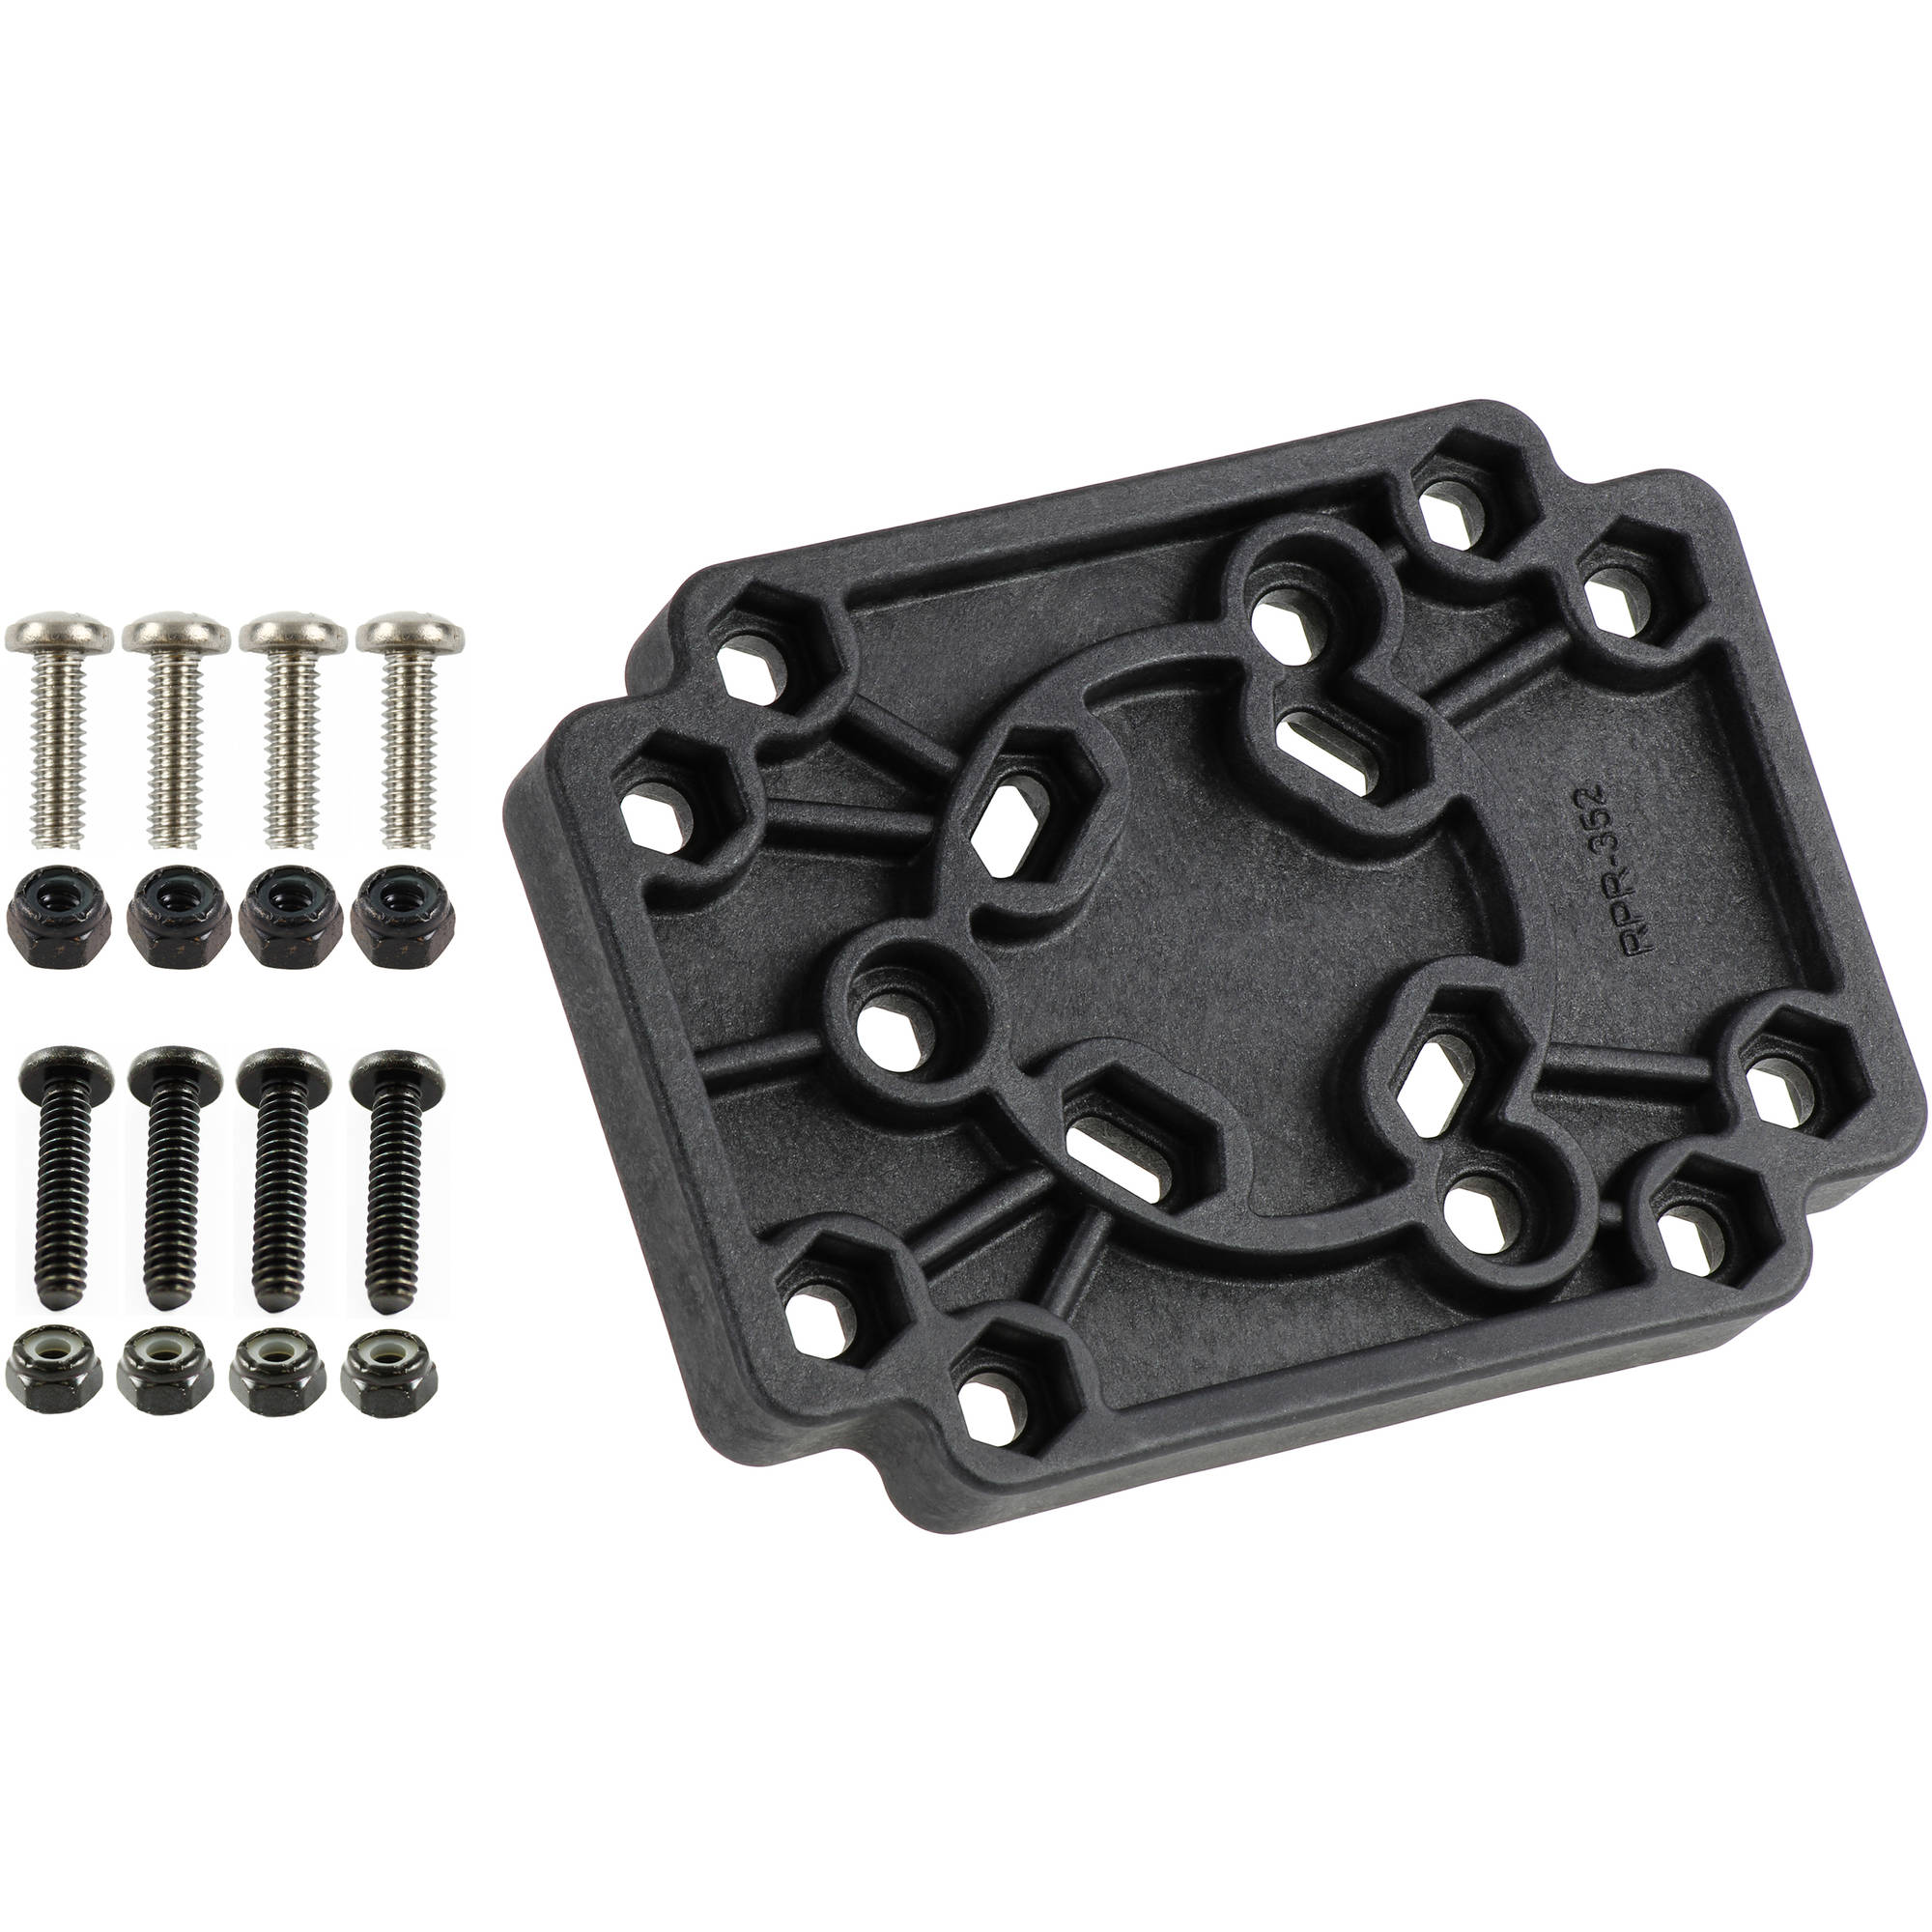 Mounting Screws for Any Mount with 4 Hole Universal AMPS Pattern